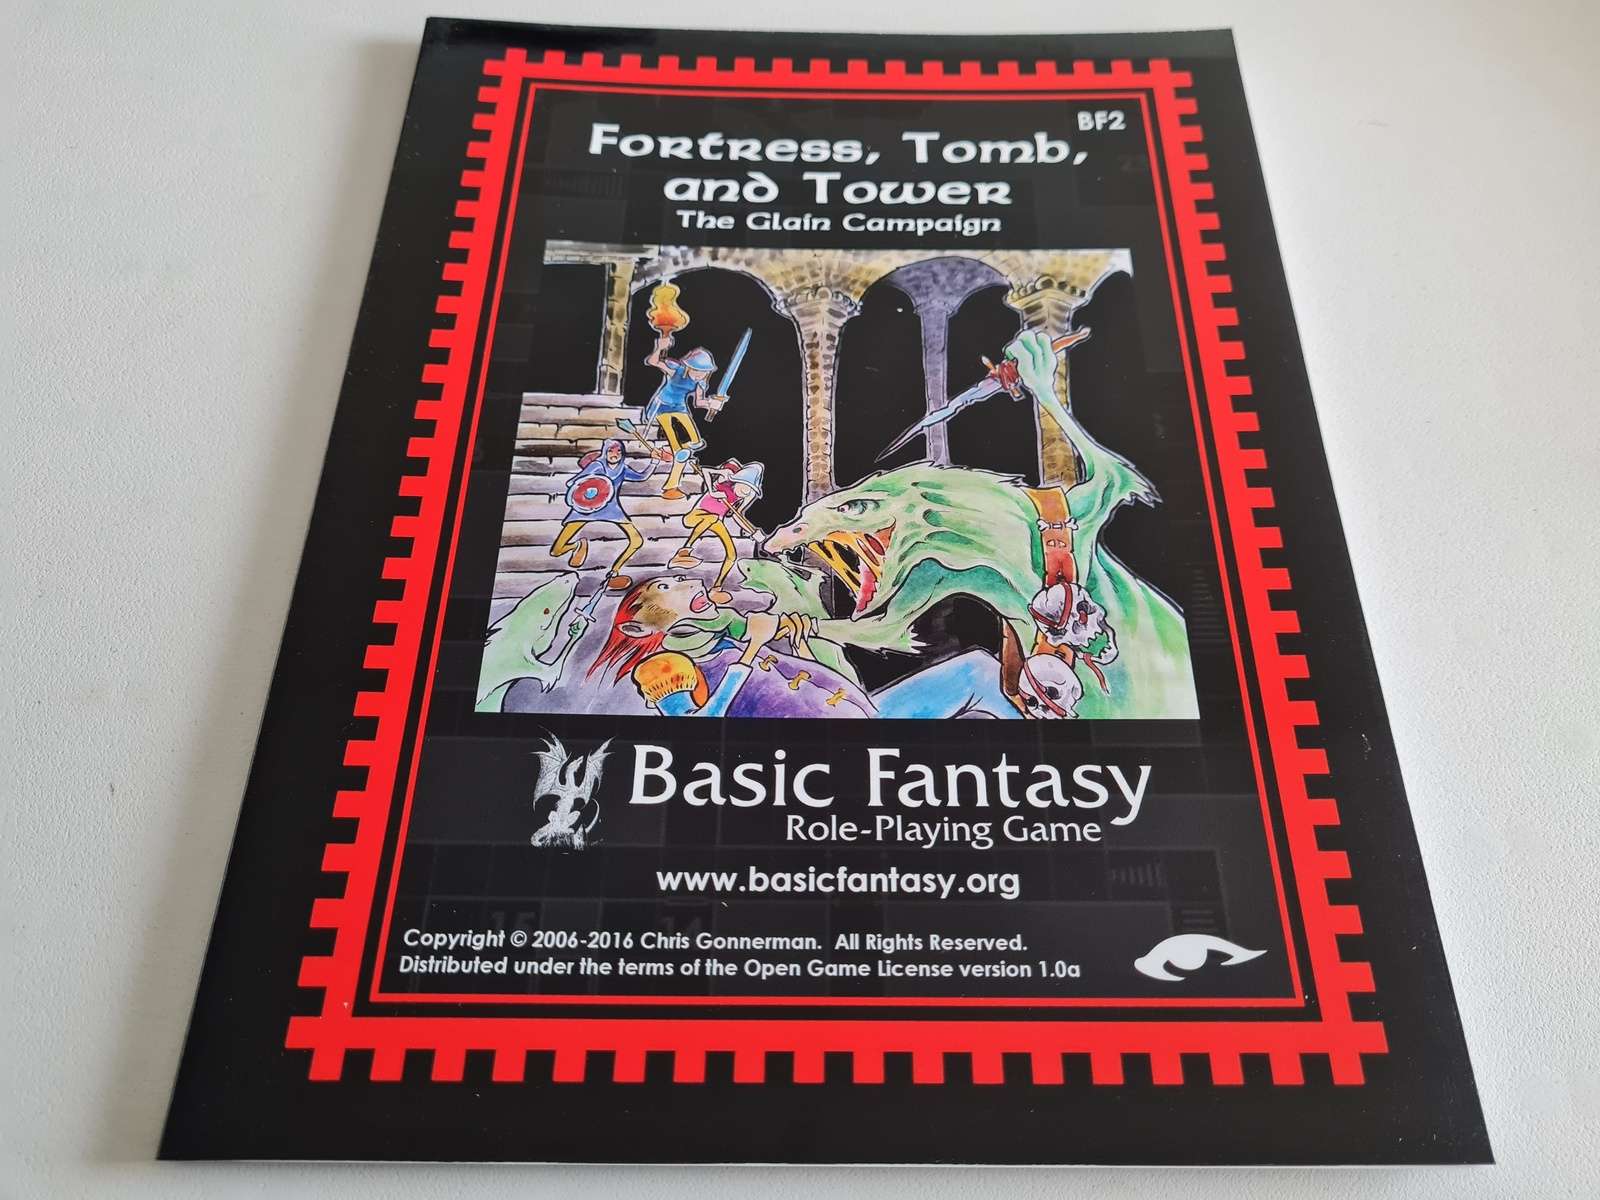 Basic Fantasy Roleplaying Game - Fortress, Tomb, and Tower (Glain Campaign)